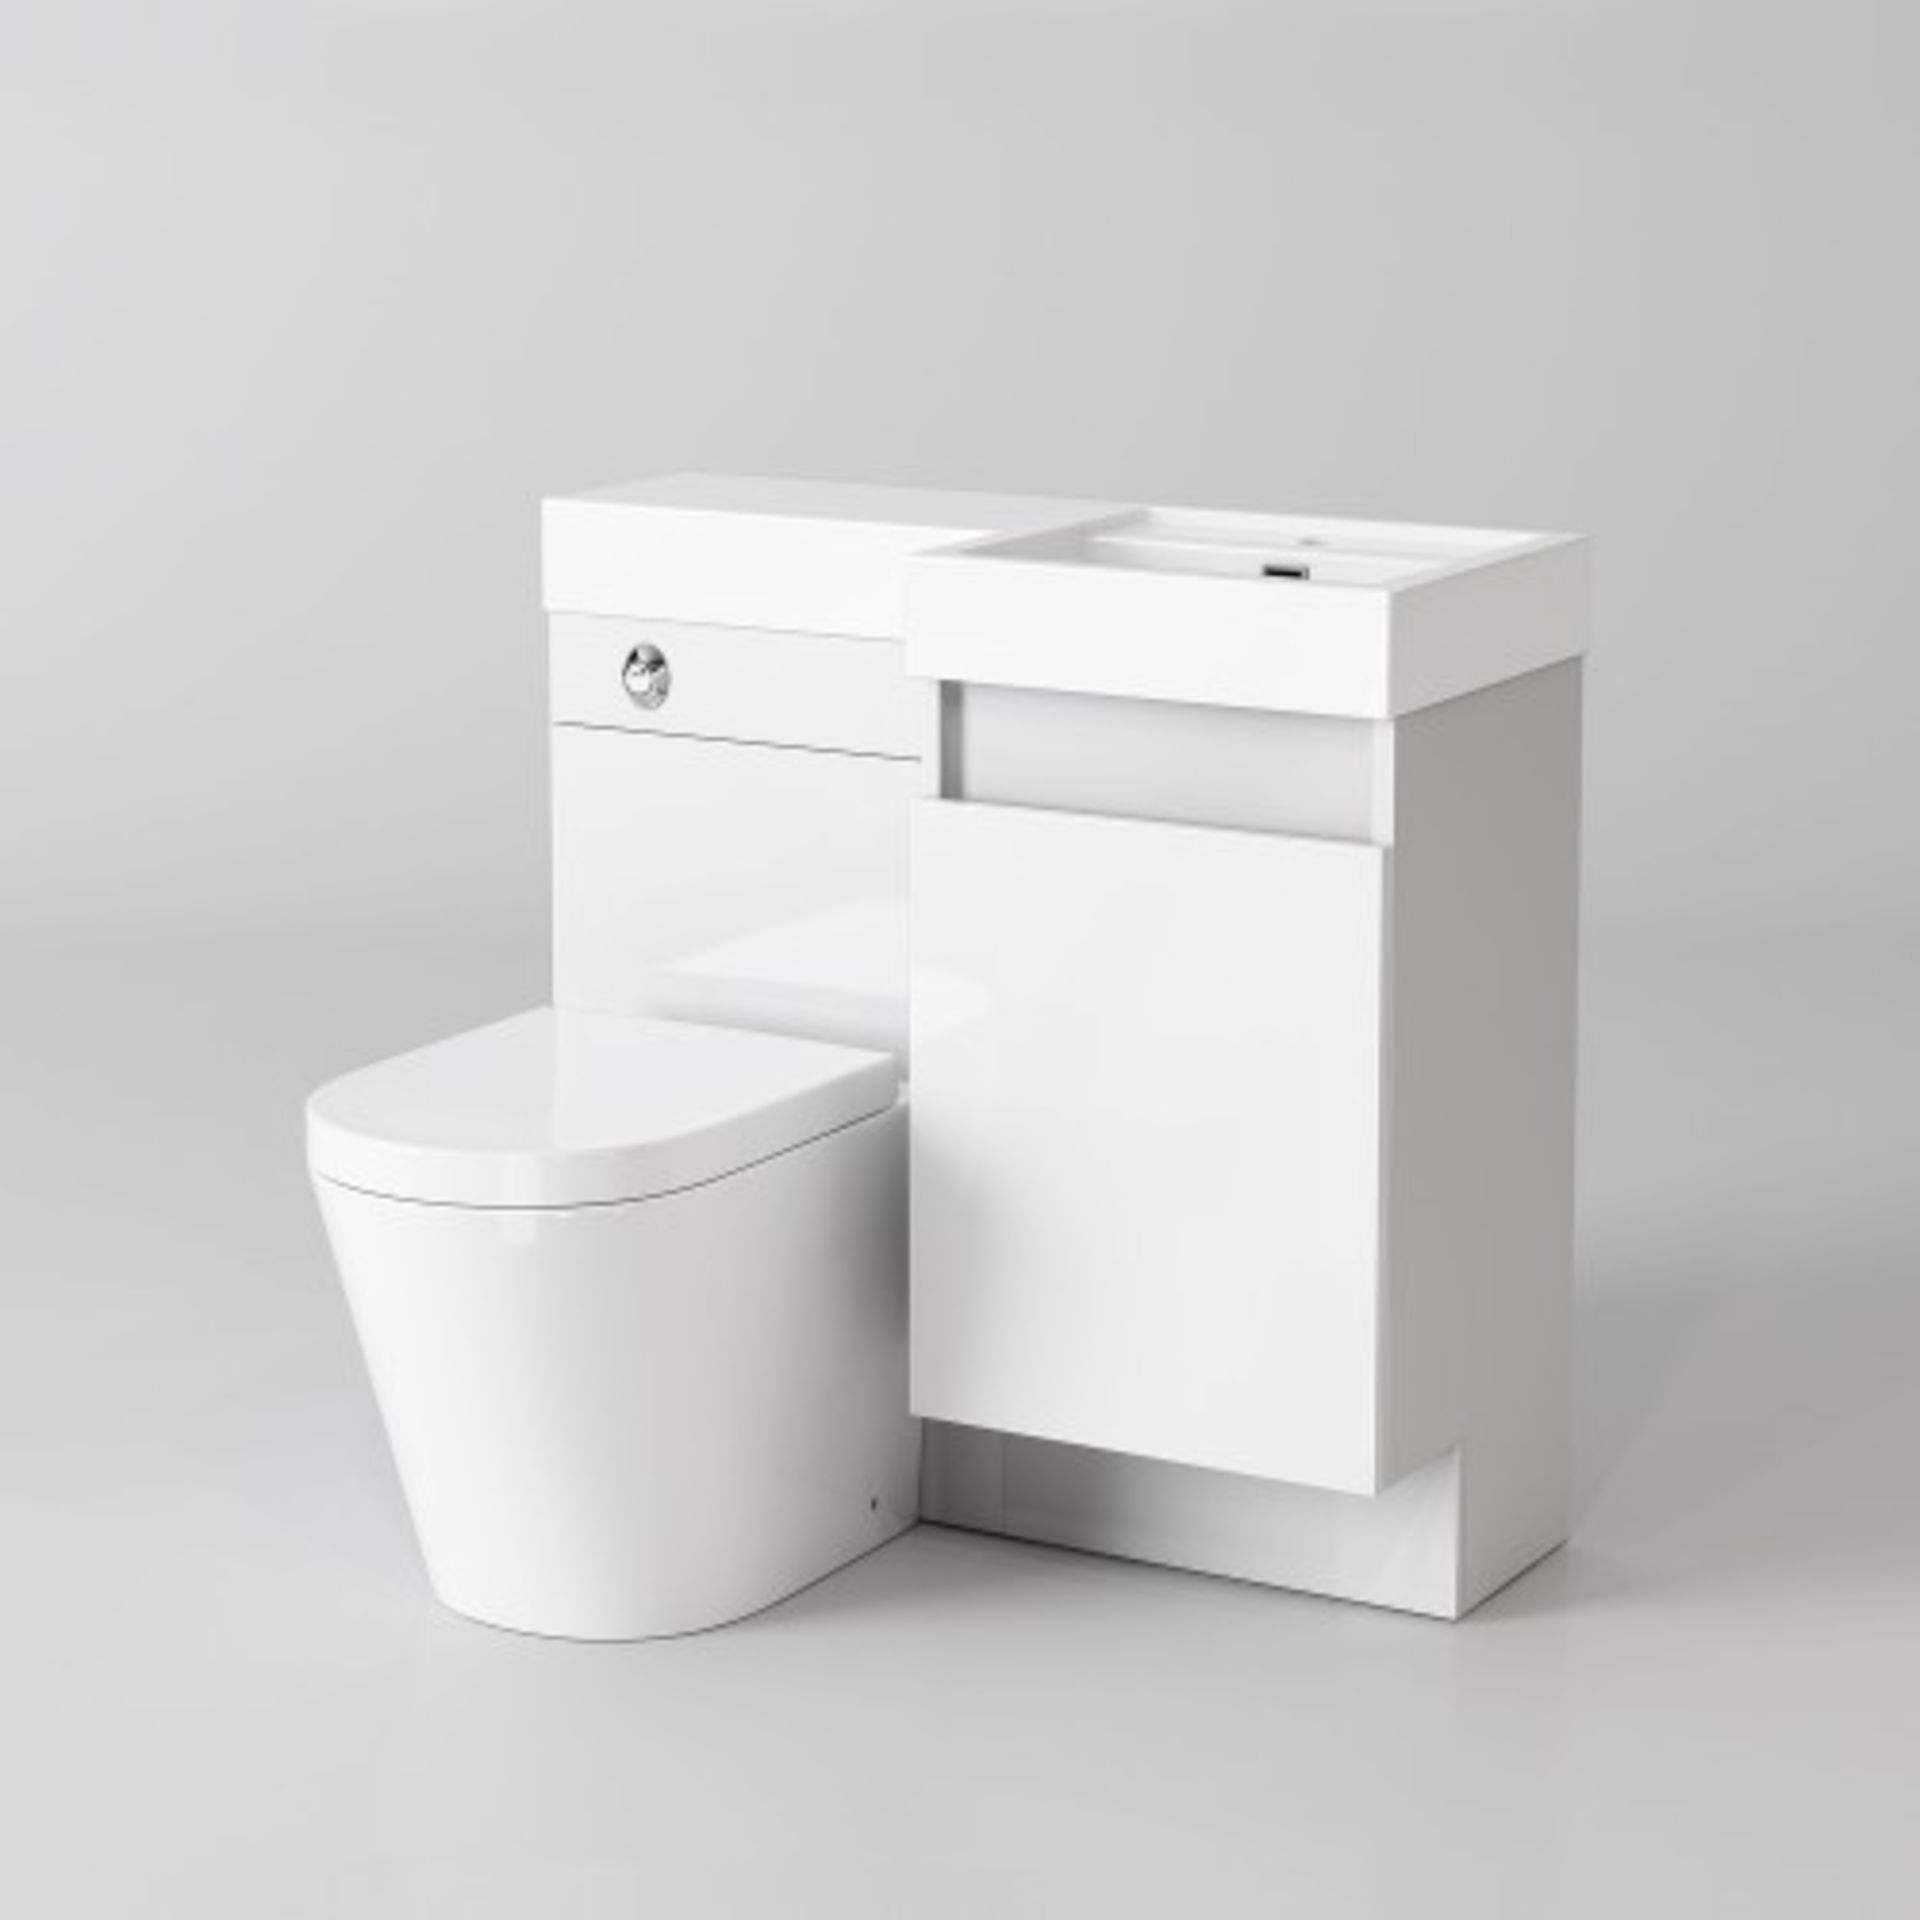 New & Boxed 906mm Olympia Gloss White Drawer Vanity Unit - Lyon Pan, Left Hand. Basin, Unit An... - Image 2 of 3